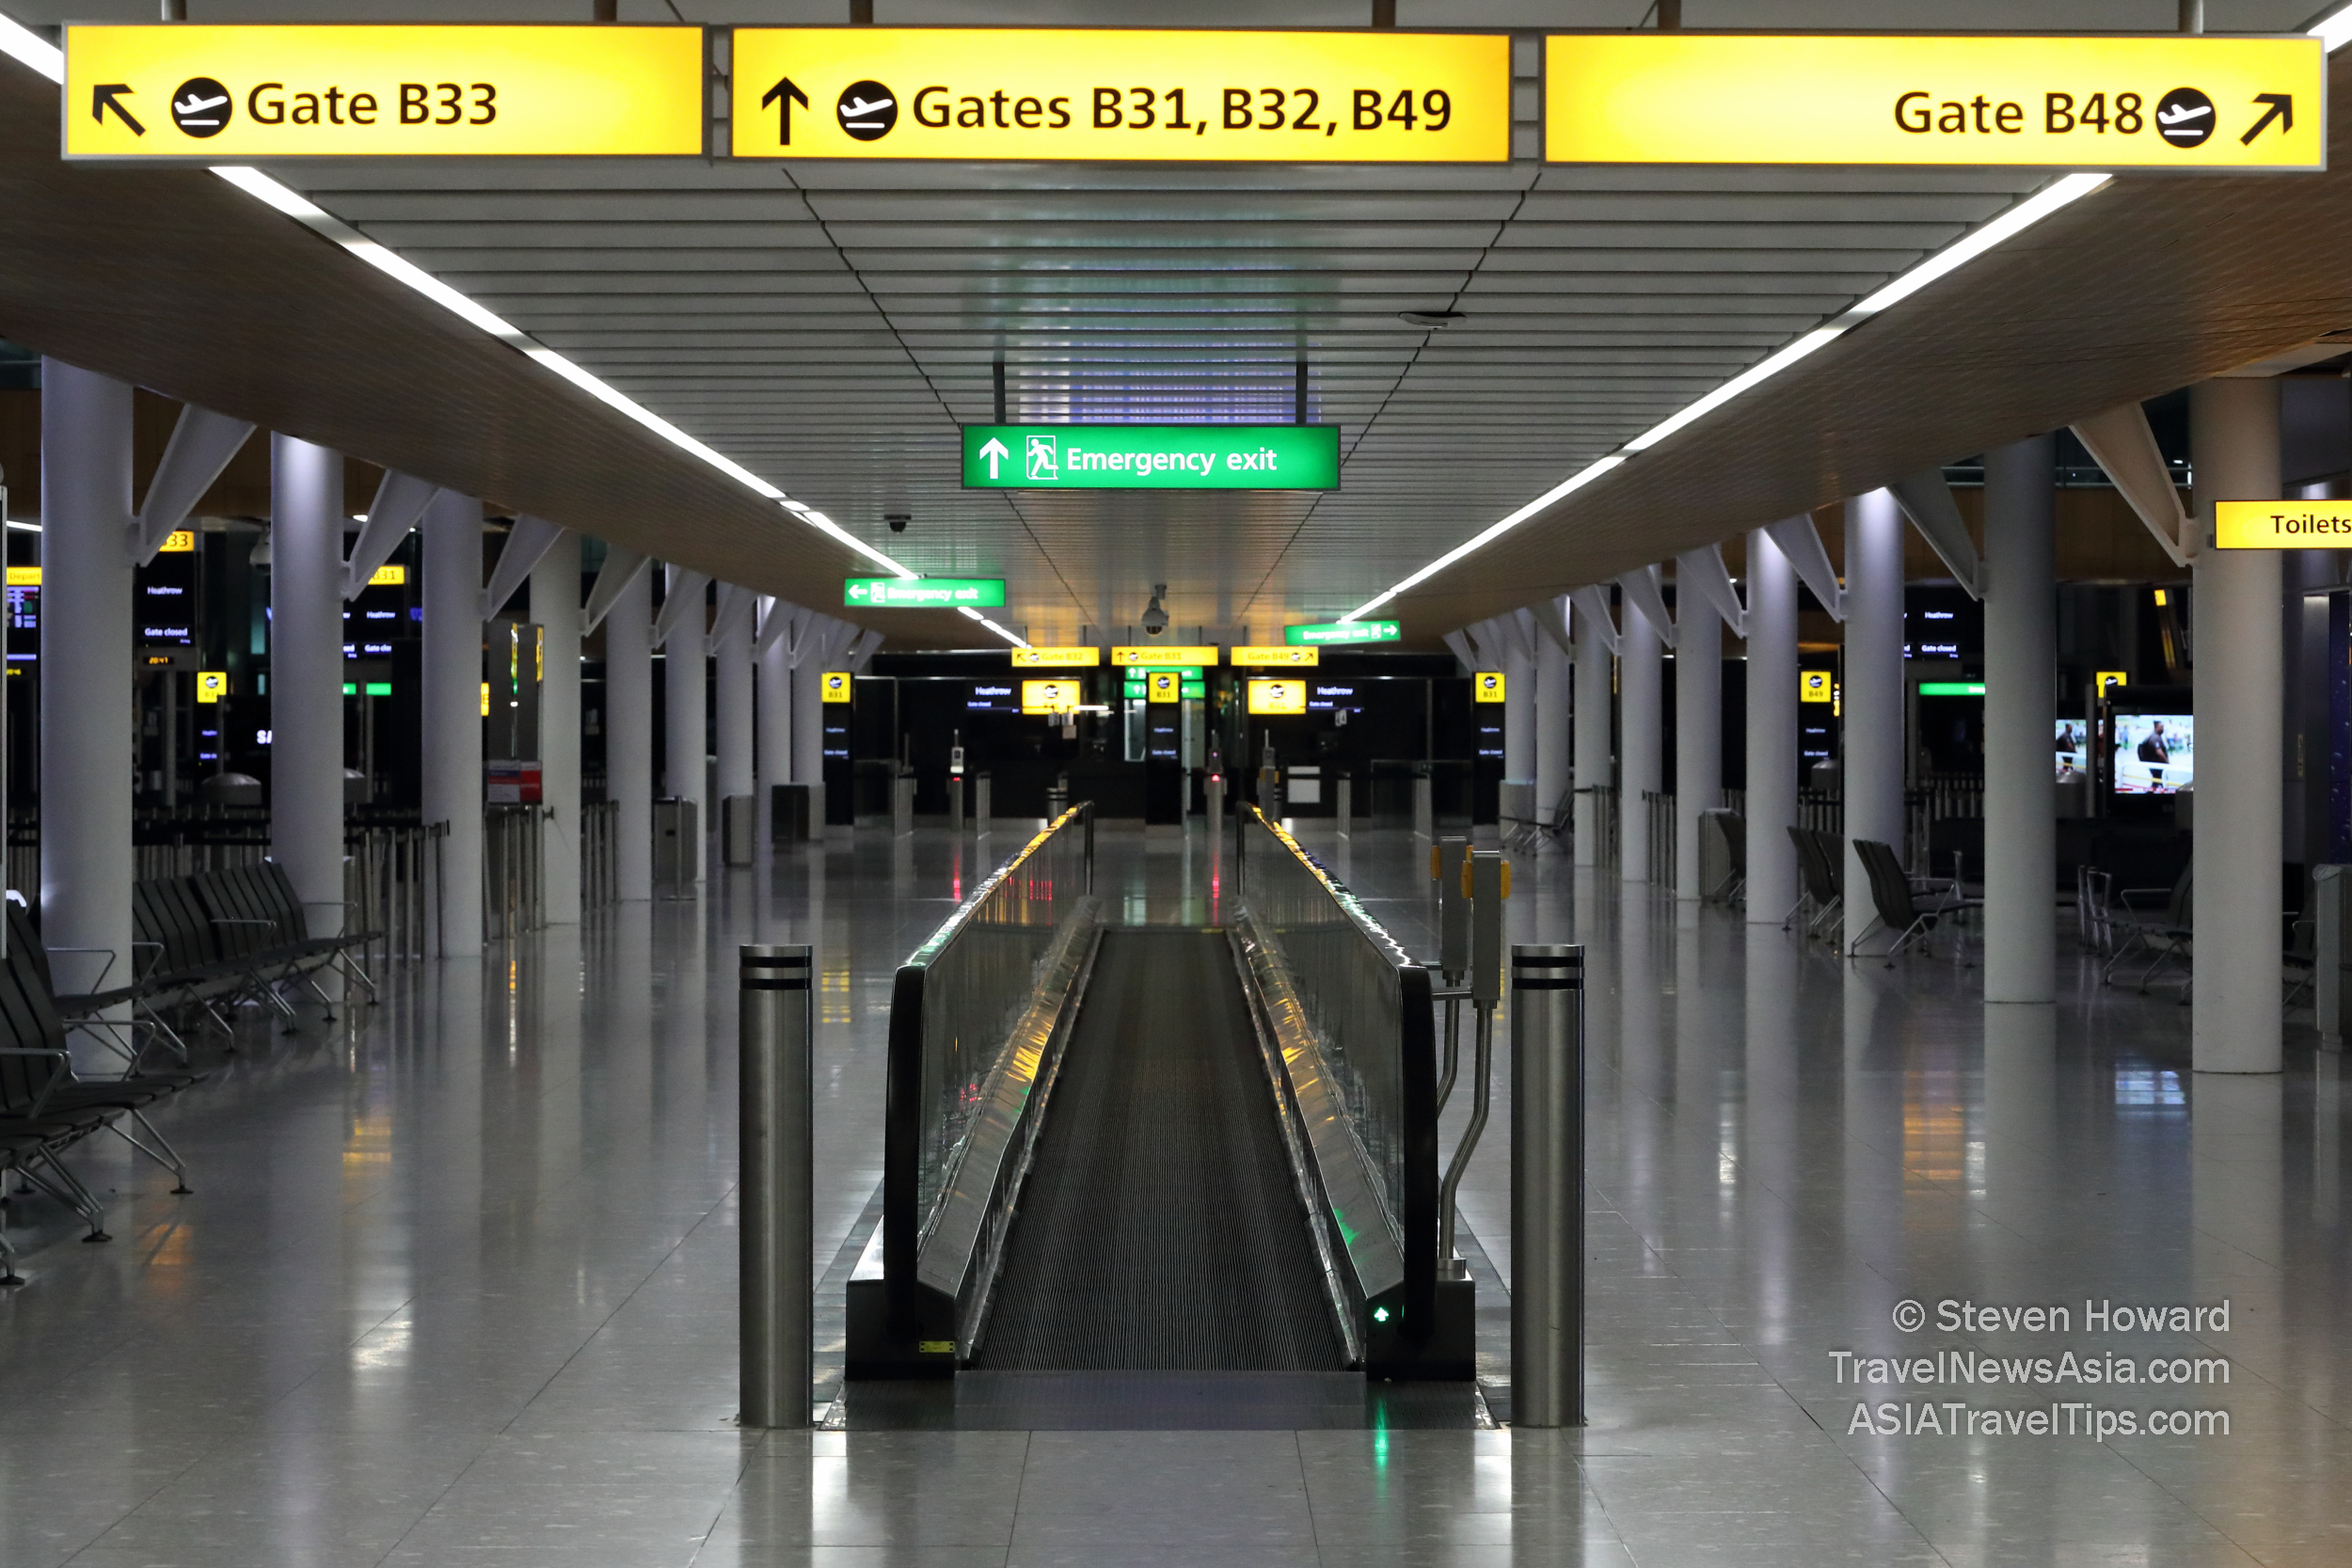 Walkway at London Heathrow (LHR). Picture by Steven Howard of TravelNewsAsia.com Click to enlarge.